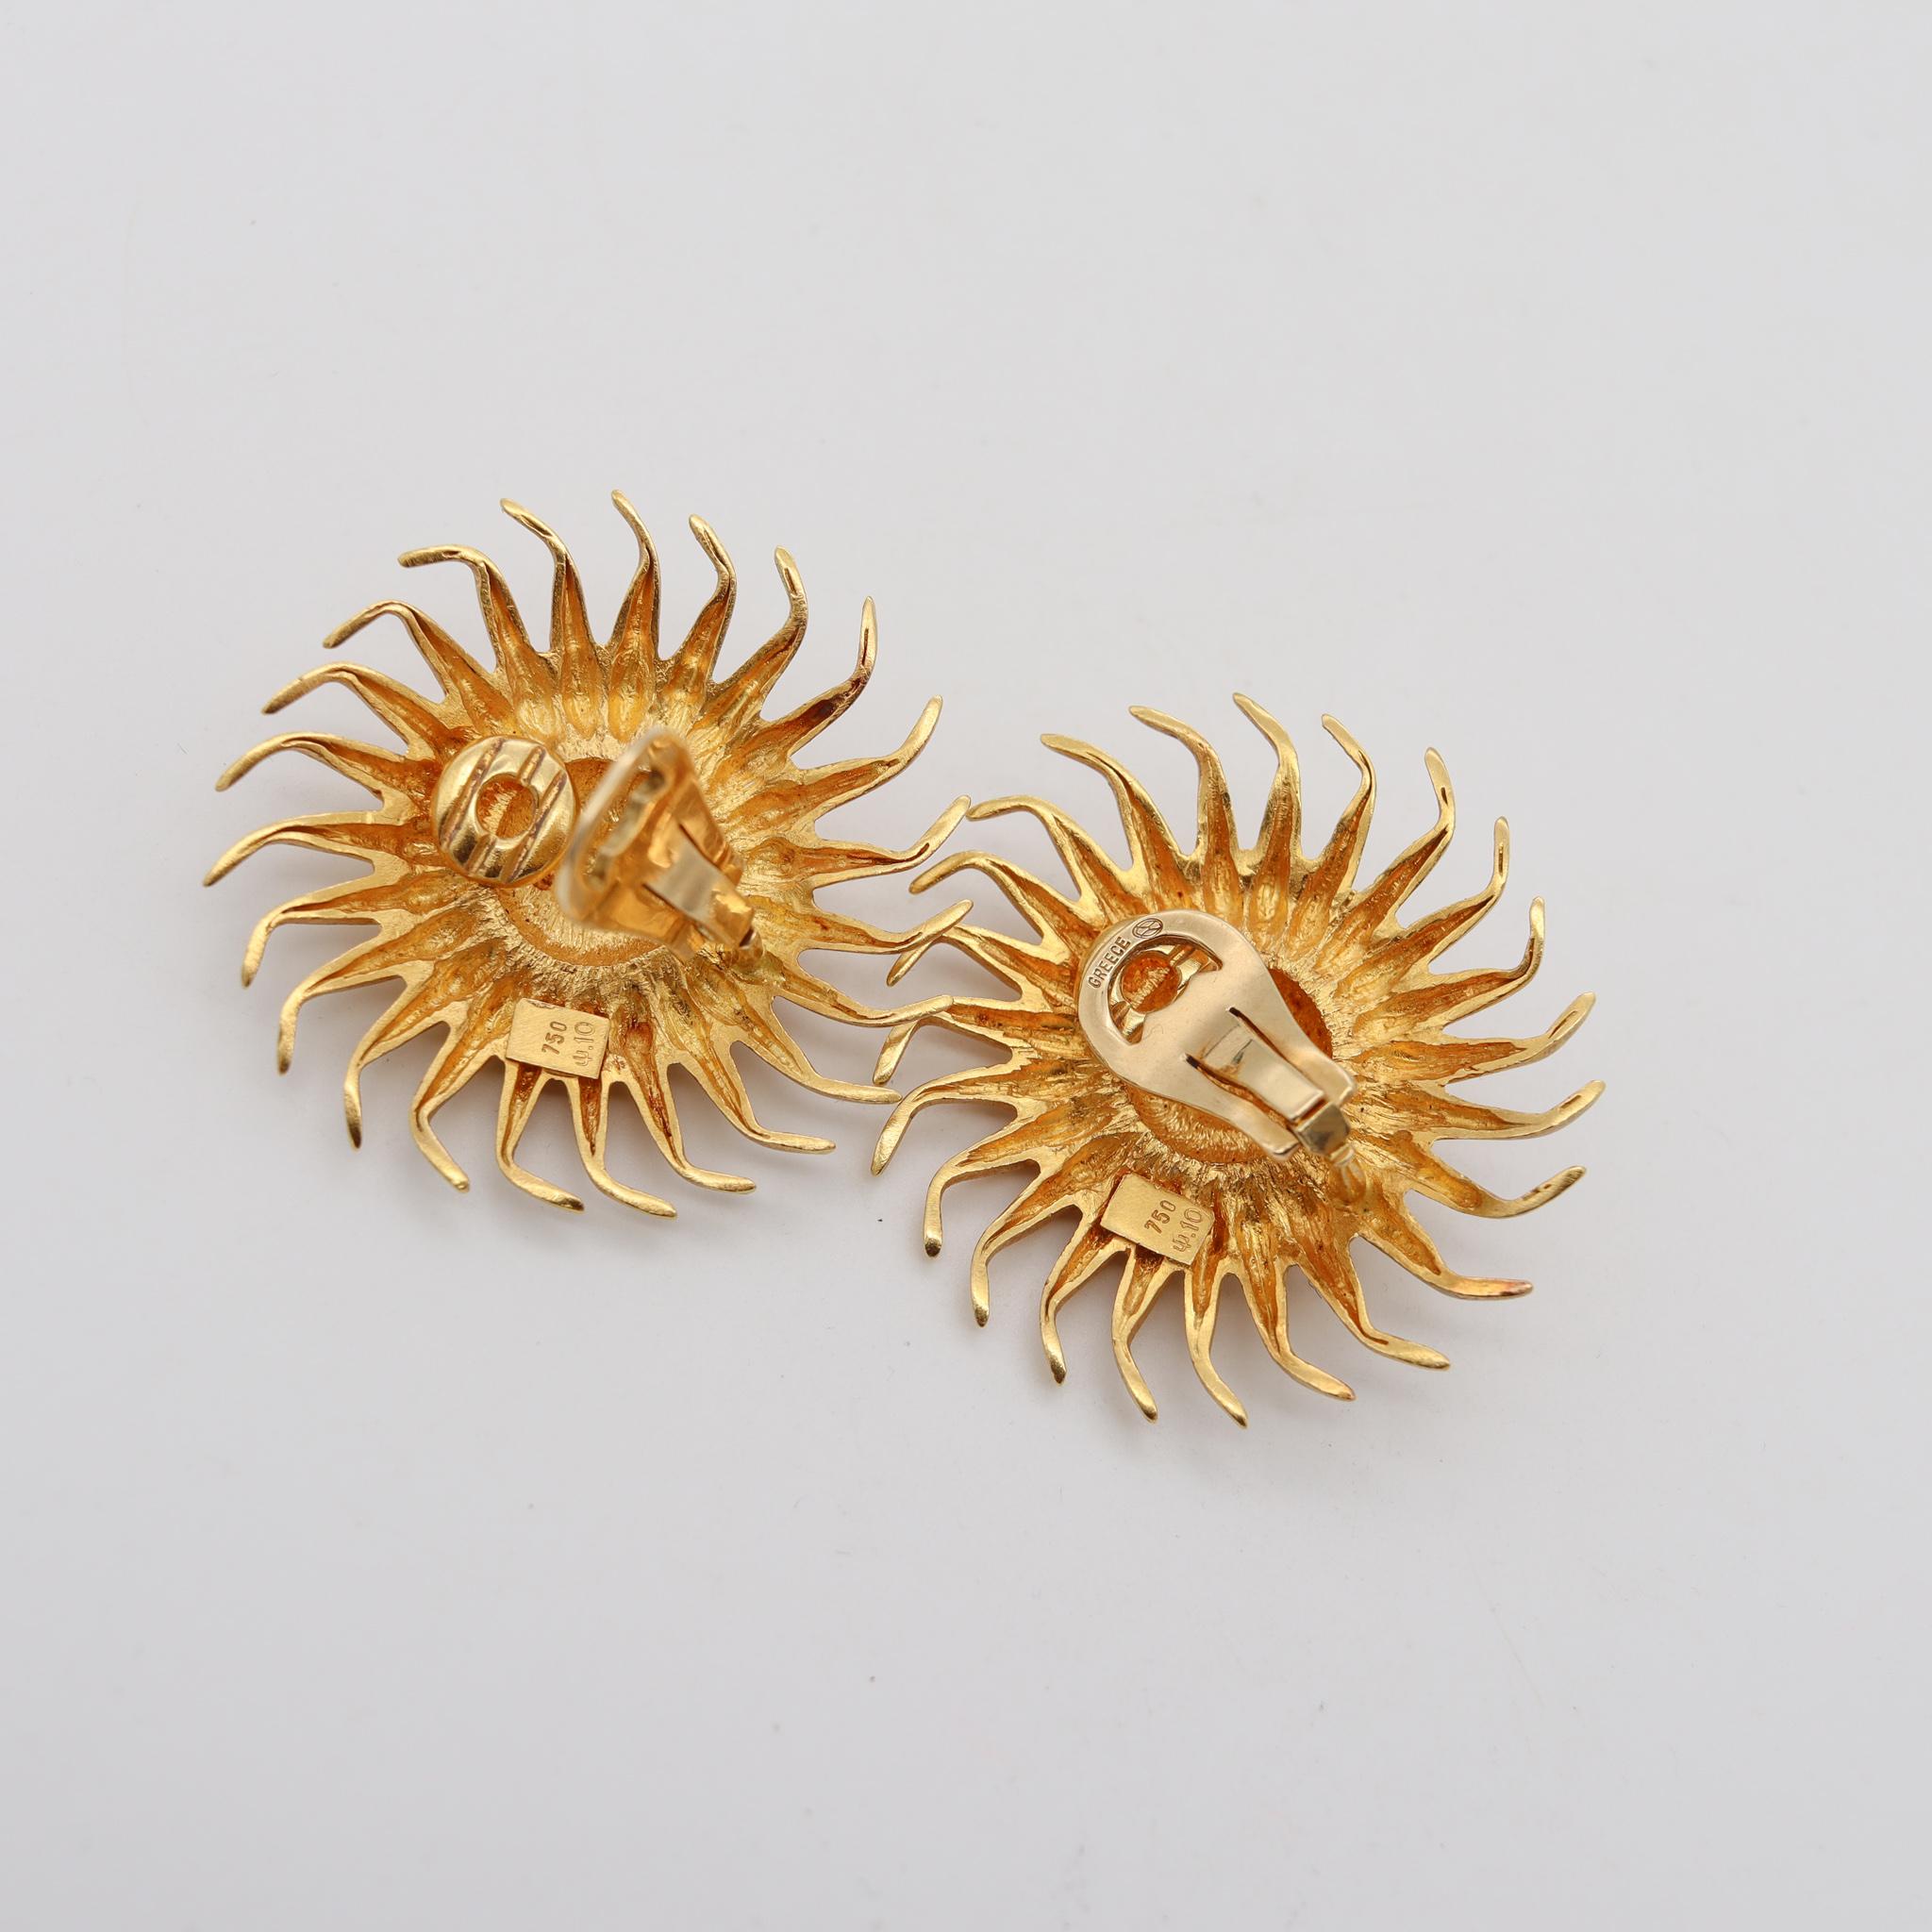 Modernist Lalaounis 1970 Hellenistic Sun Burst Clips Earrings in Solid 18Kt Yellow Gold For Sale